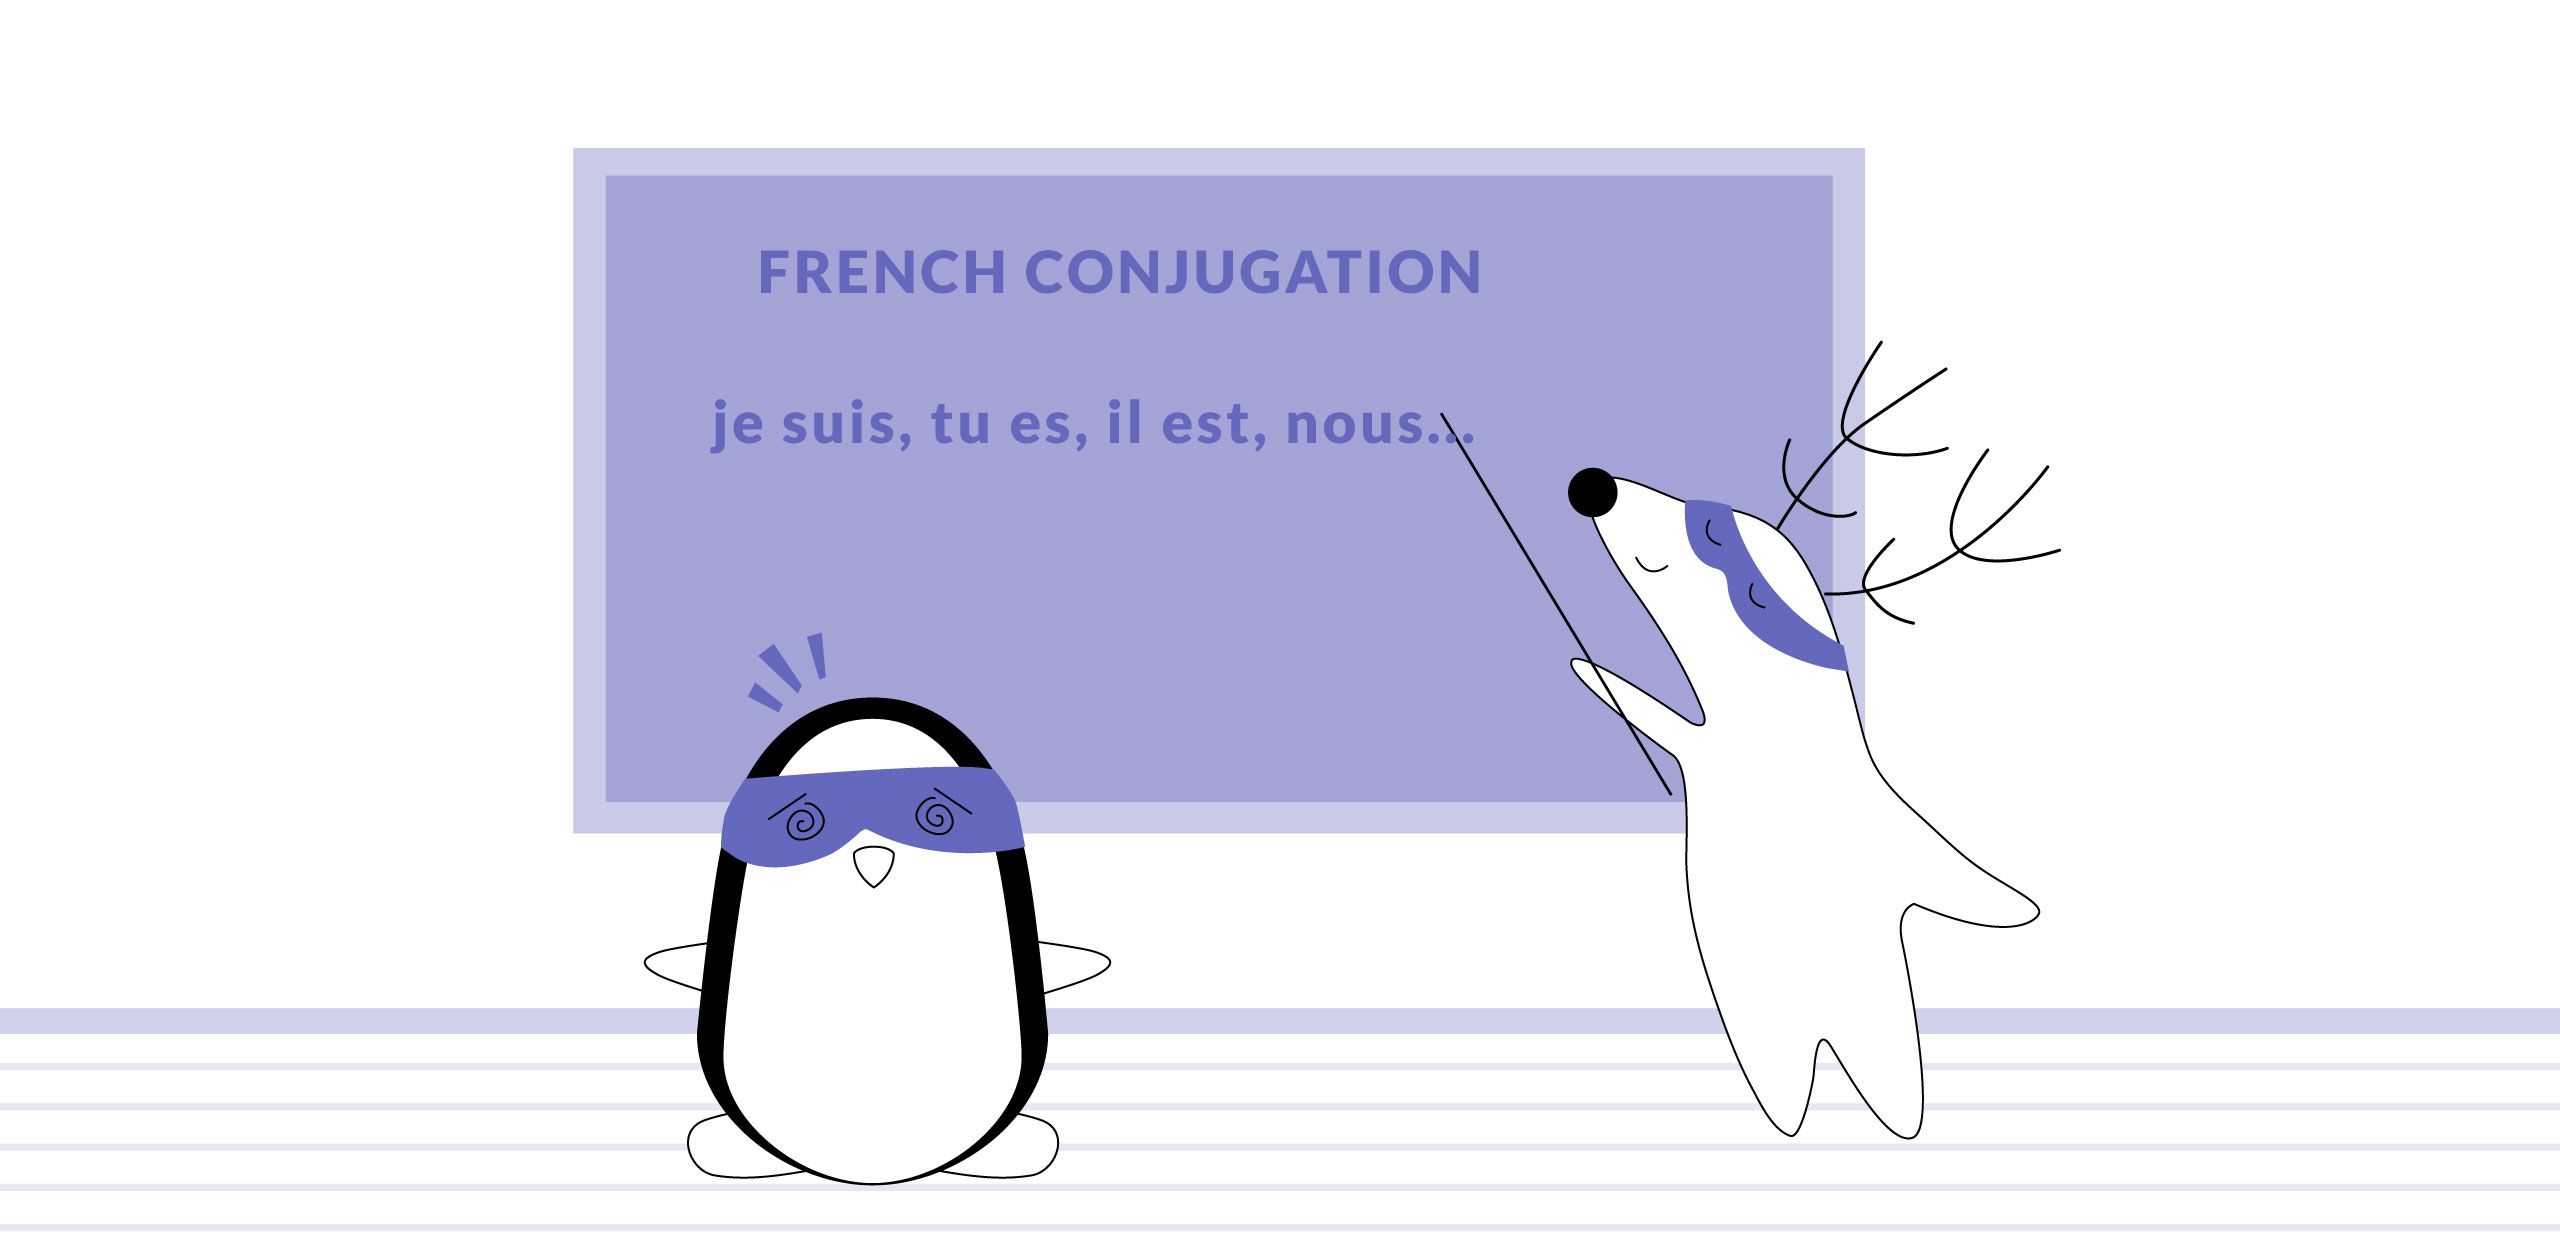 Conjugations in French